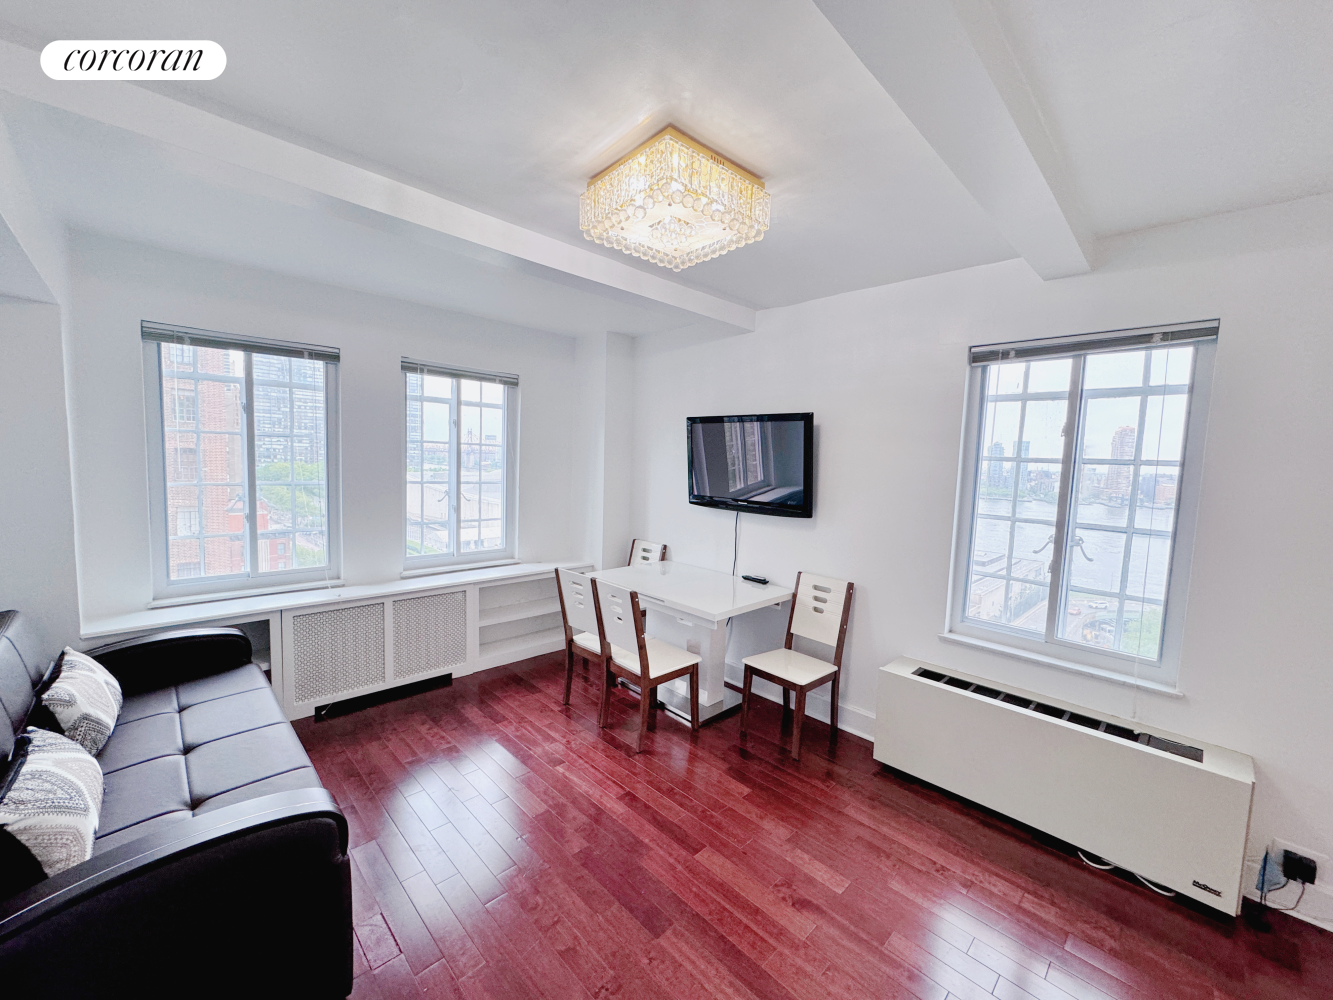 25 Tudor City Place 901, Murray Hill, Midtown East, NYC - 1 Bathrooms  
1 Rooms - 